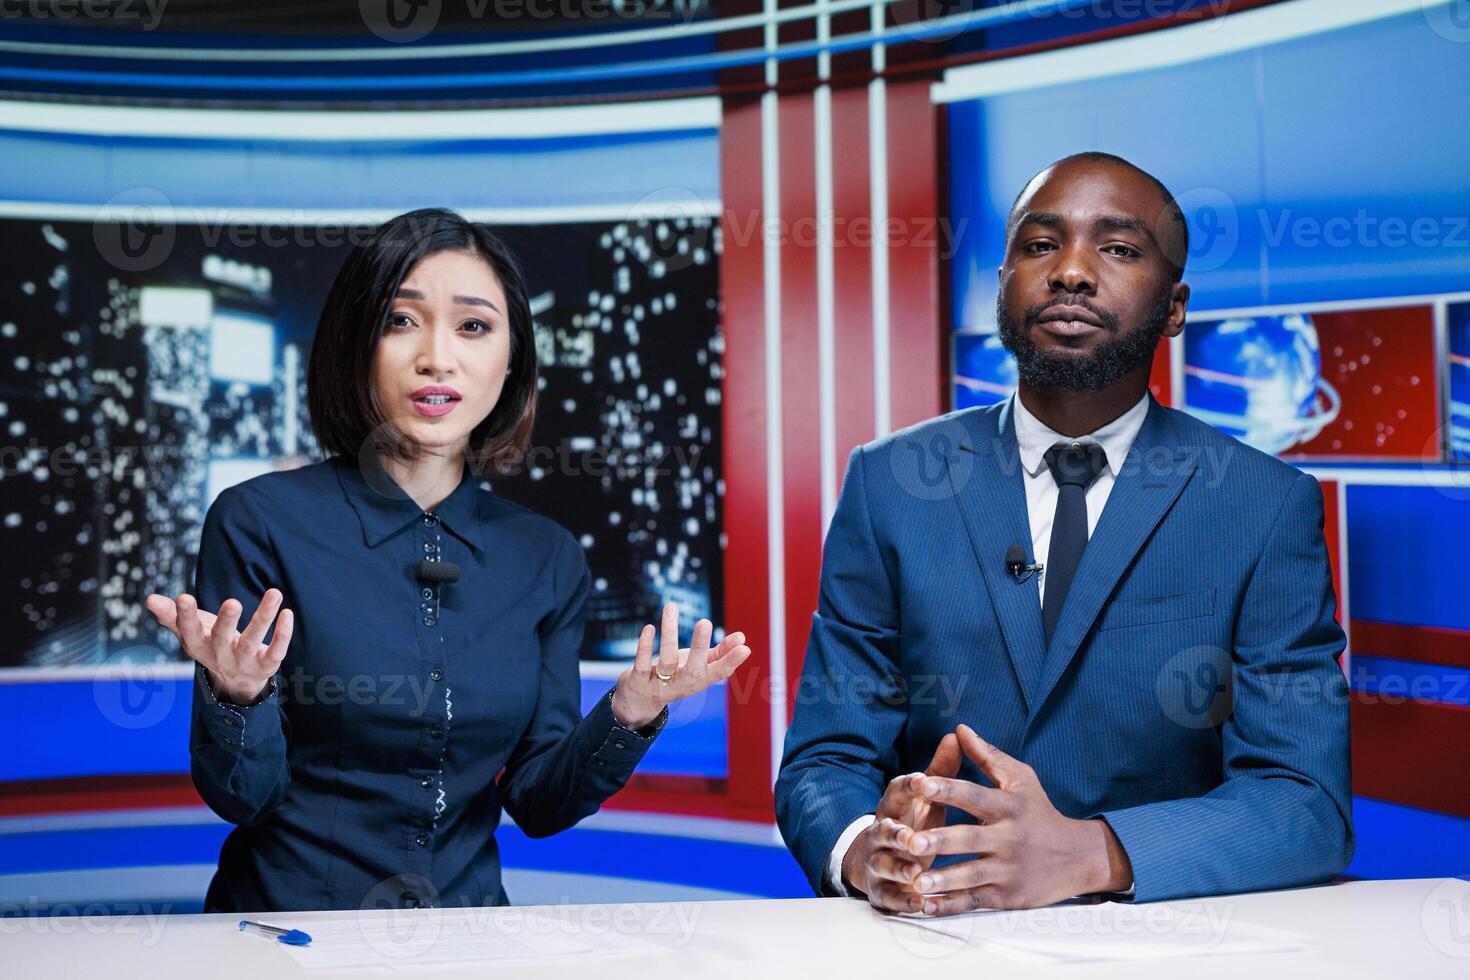 Talk show hosts reading breaking news headlines live on television broadcast, working together to provide relevant content for tv program. Diverse team of reporters in newsroom. photo